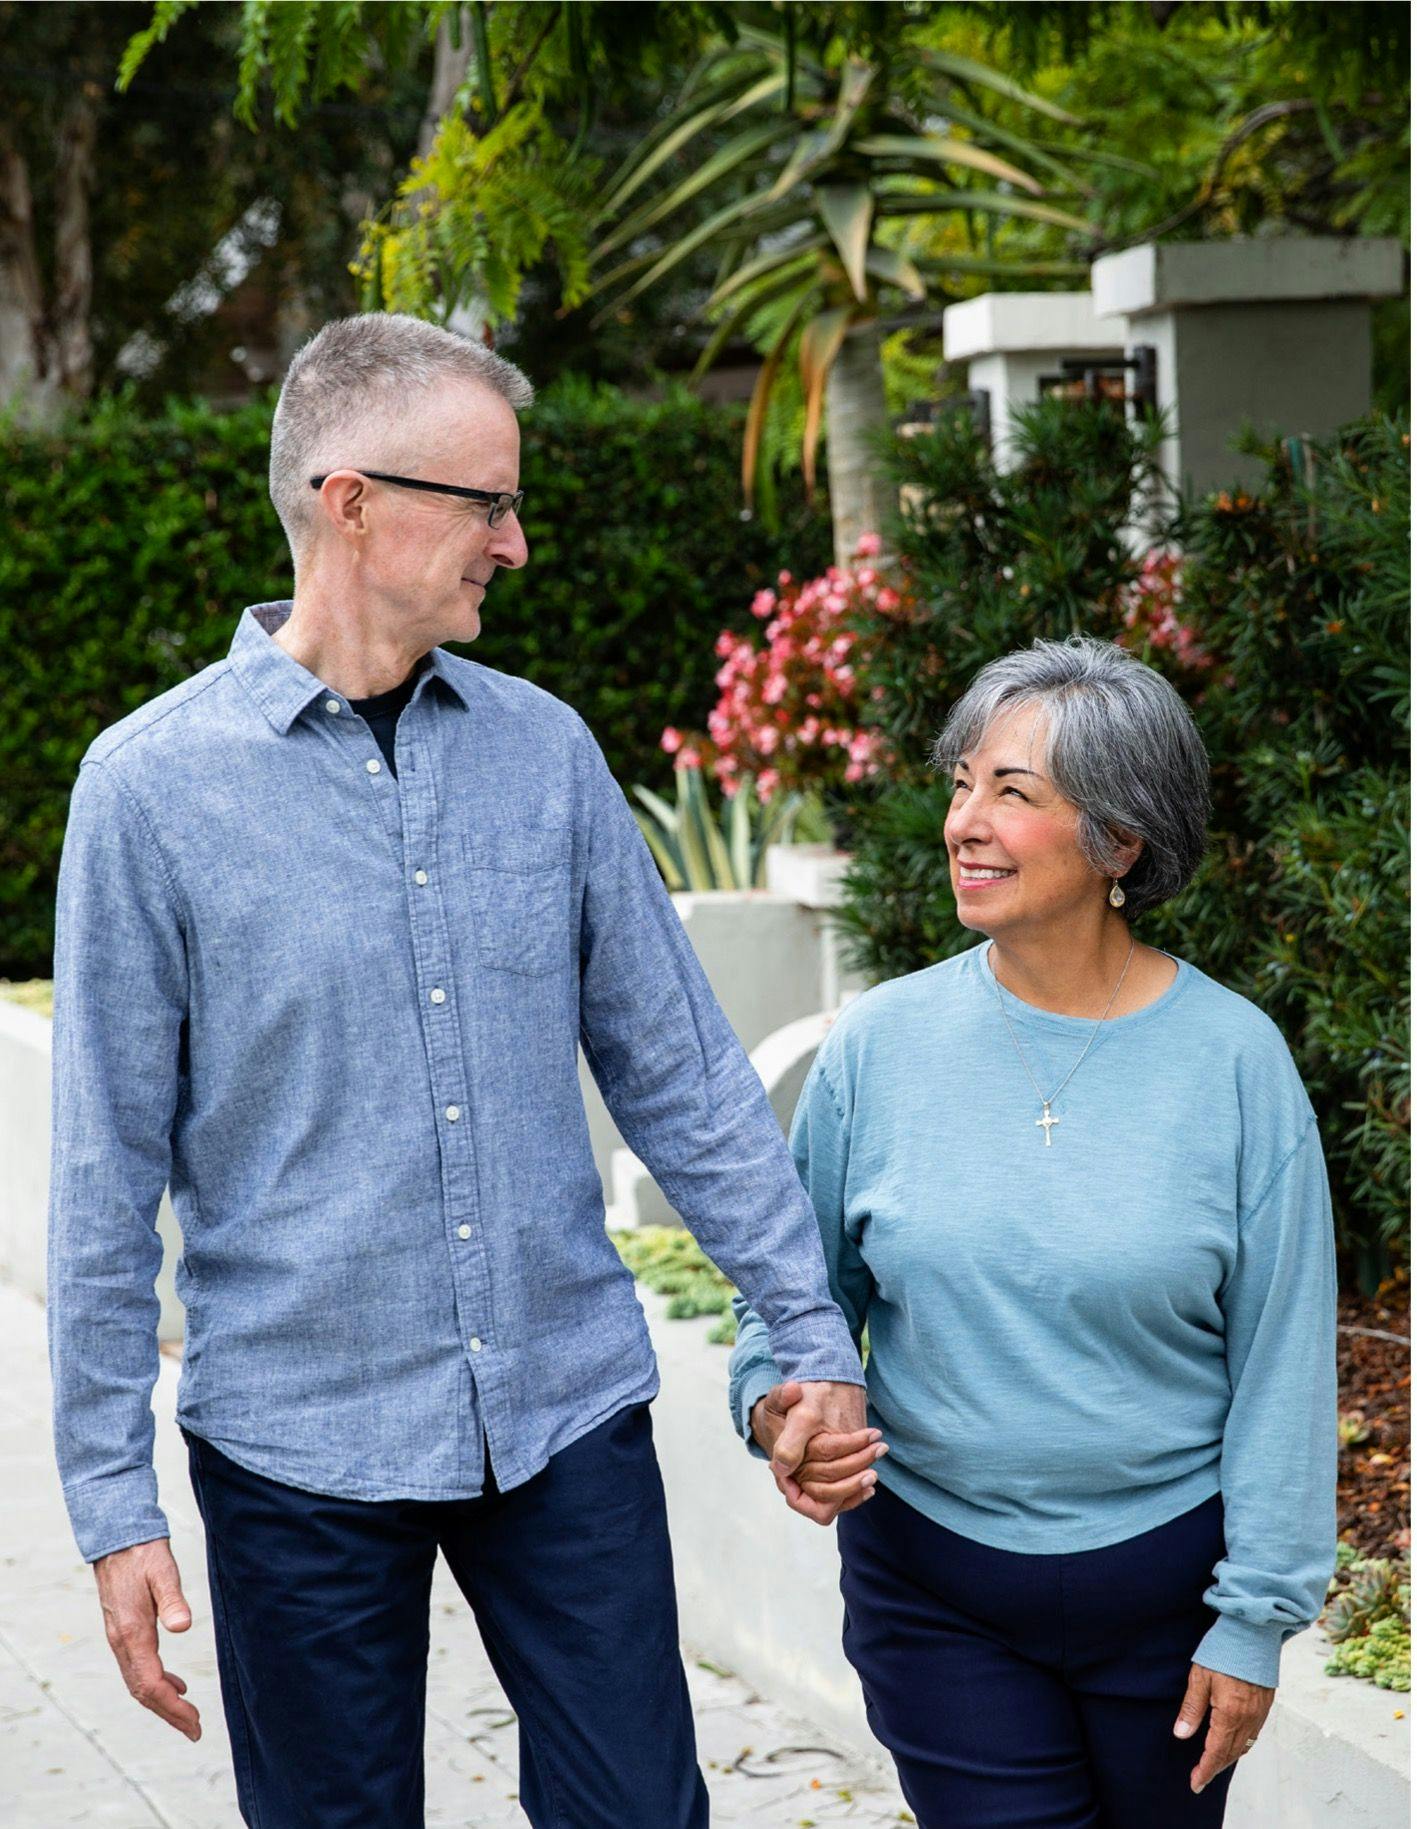 When anxiety from the fear of cancer recurrence takes over, Keith Tolley says he finds talking to someone in his support system, like his wife Esmeralda Tolley, to be helpful. 

Photo by Jenny Siegwart